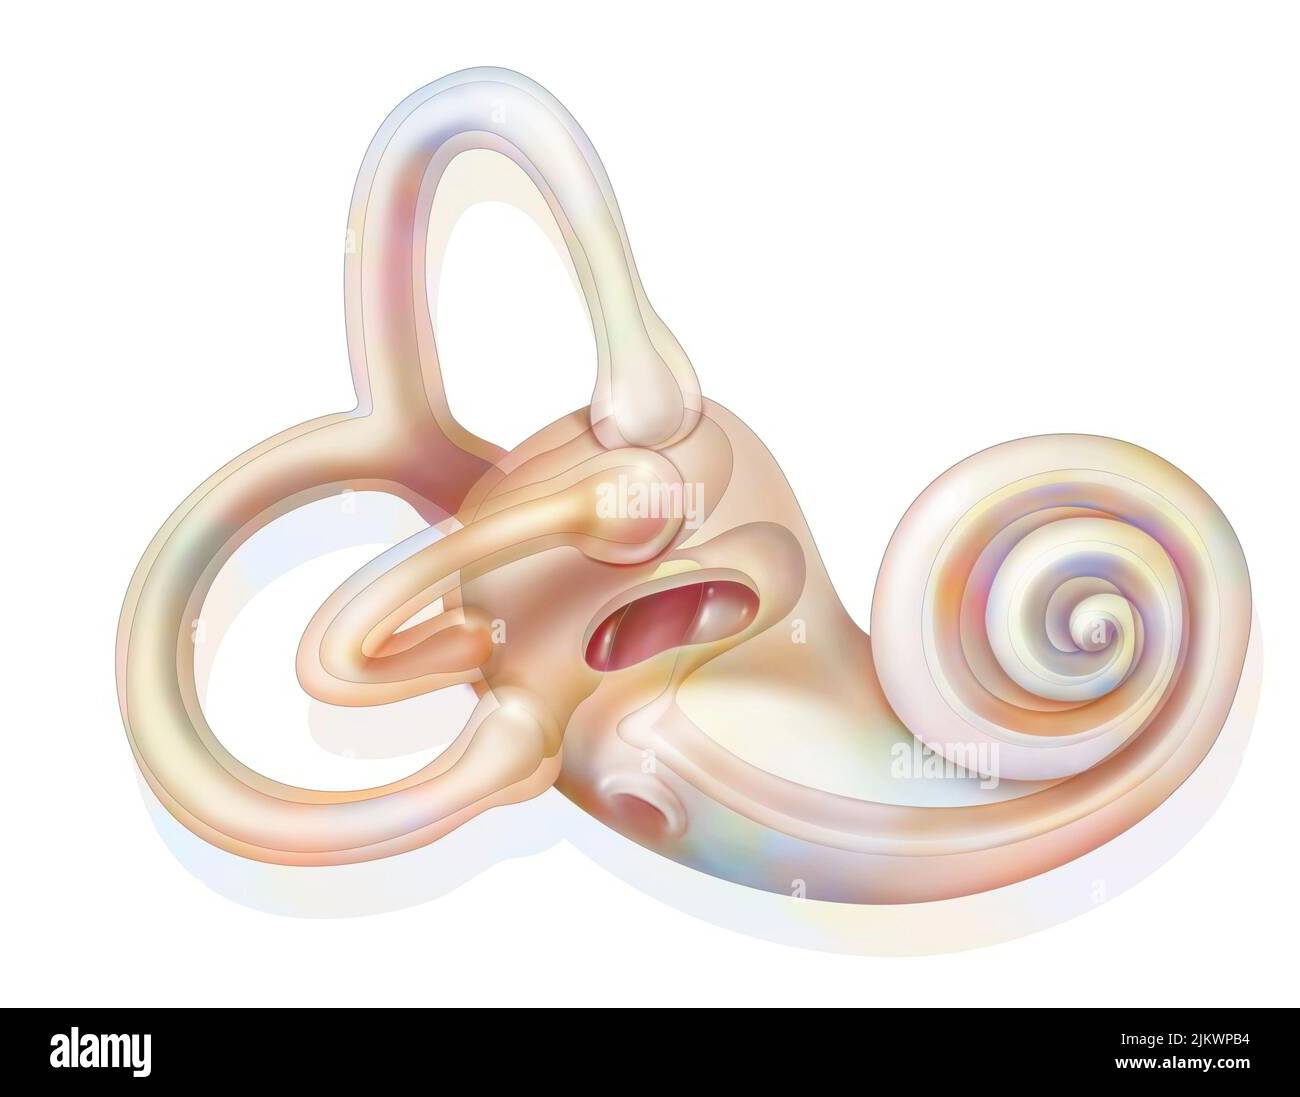 Anatomy of the inner ear showing the macule. Stock Photo